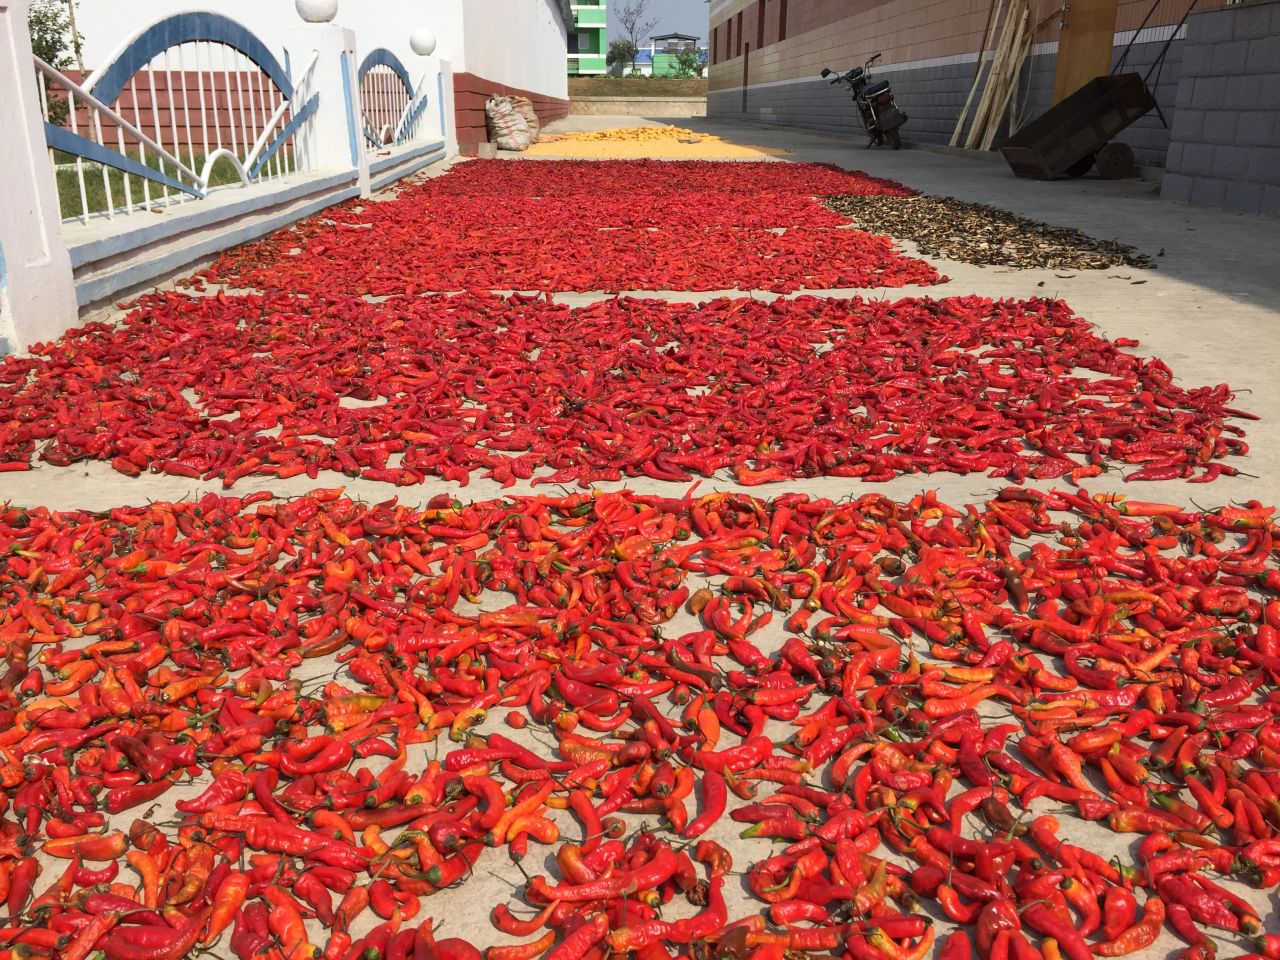 Chili peppers, used for making kimchi, are drying in the sun at the Jang Chon cooperative farm. September and October typically yield the most abundant harvests. Winter is coming and North Koreans will soon stock up on cabbage to make kimchi, the fermented dish that is a staple of the Korean diet all year round, but especially during the long, cold winter months.